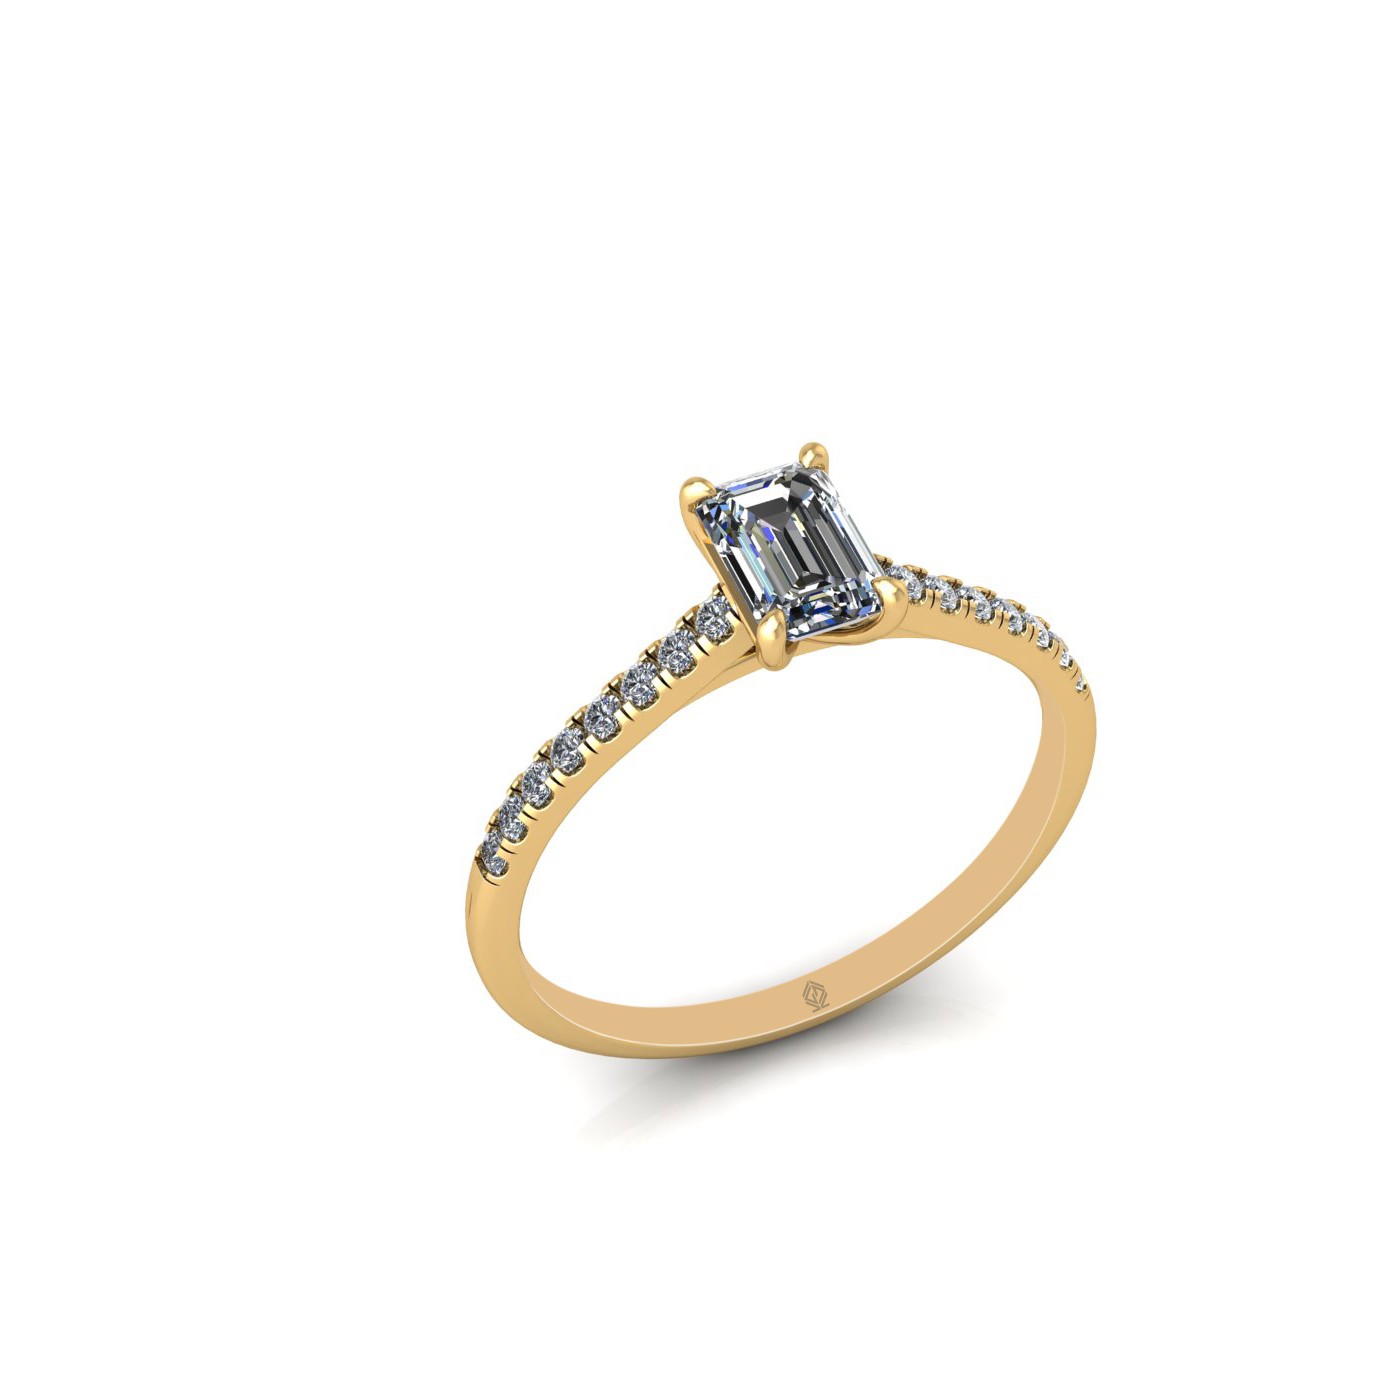 18k yellow gold  0,50 ct 4 prongs emerald cut diamond engagement ring with whisper thin pavÉ set band